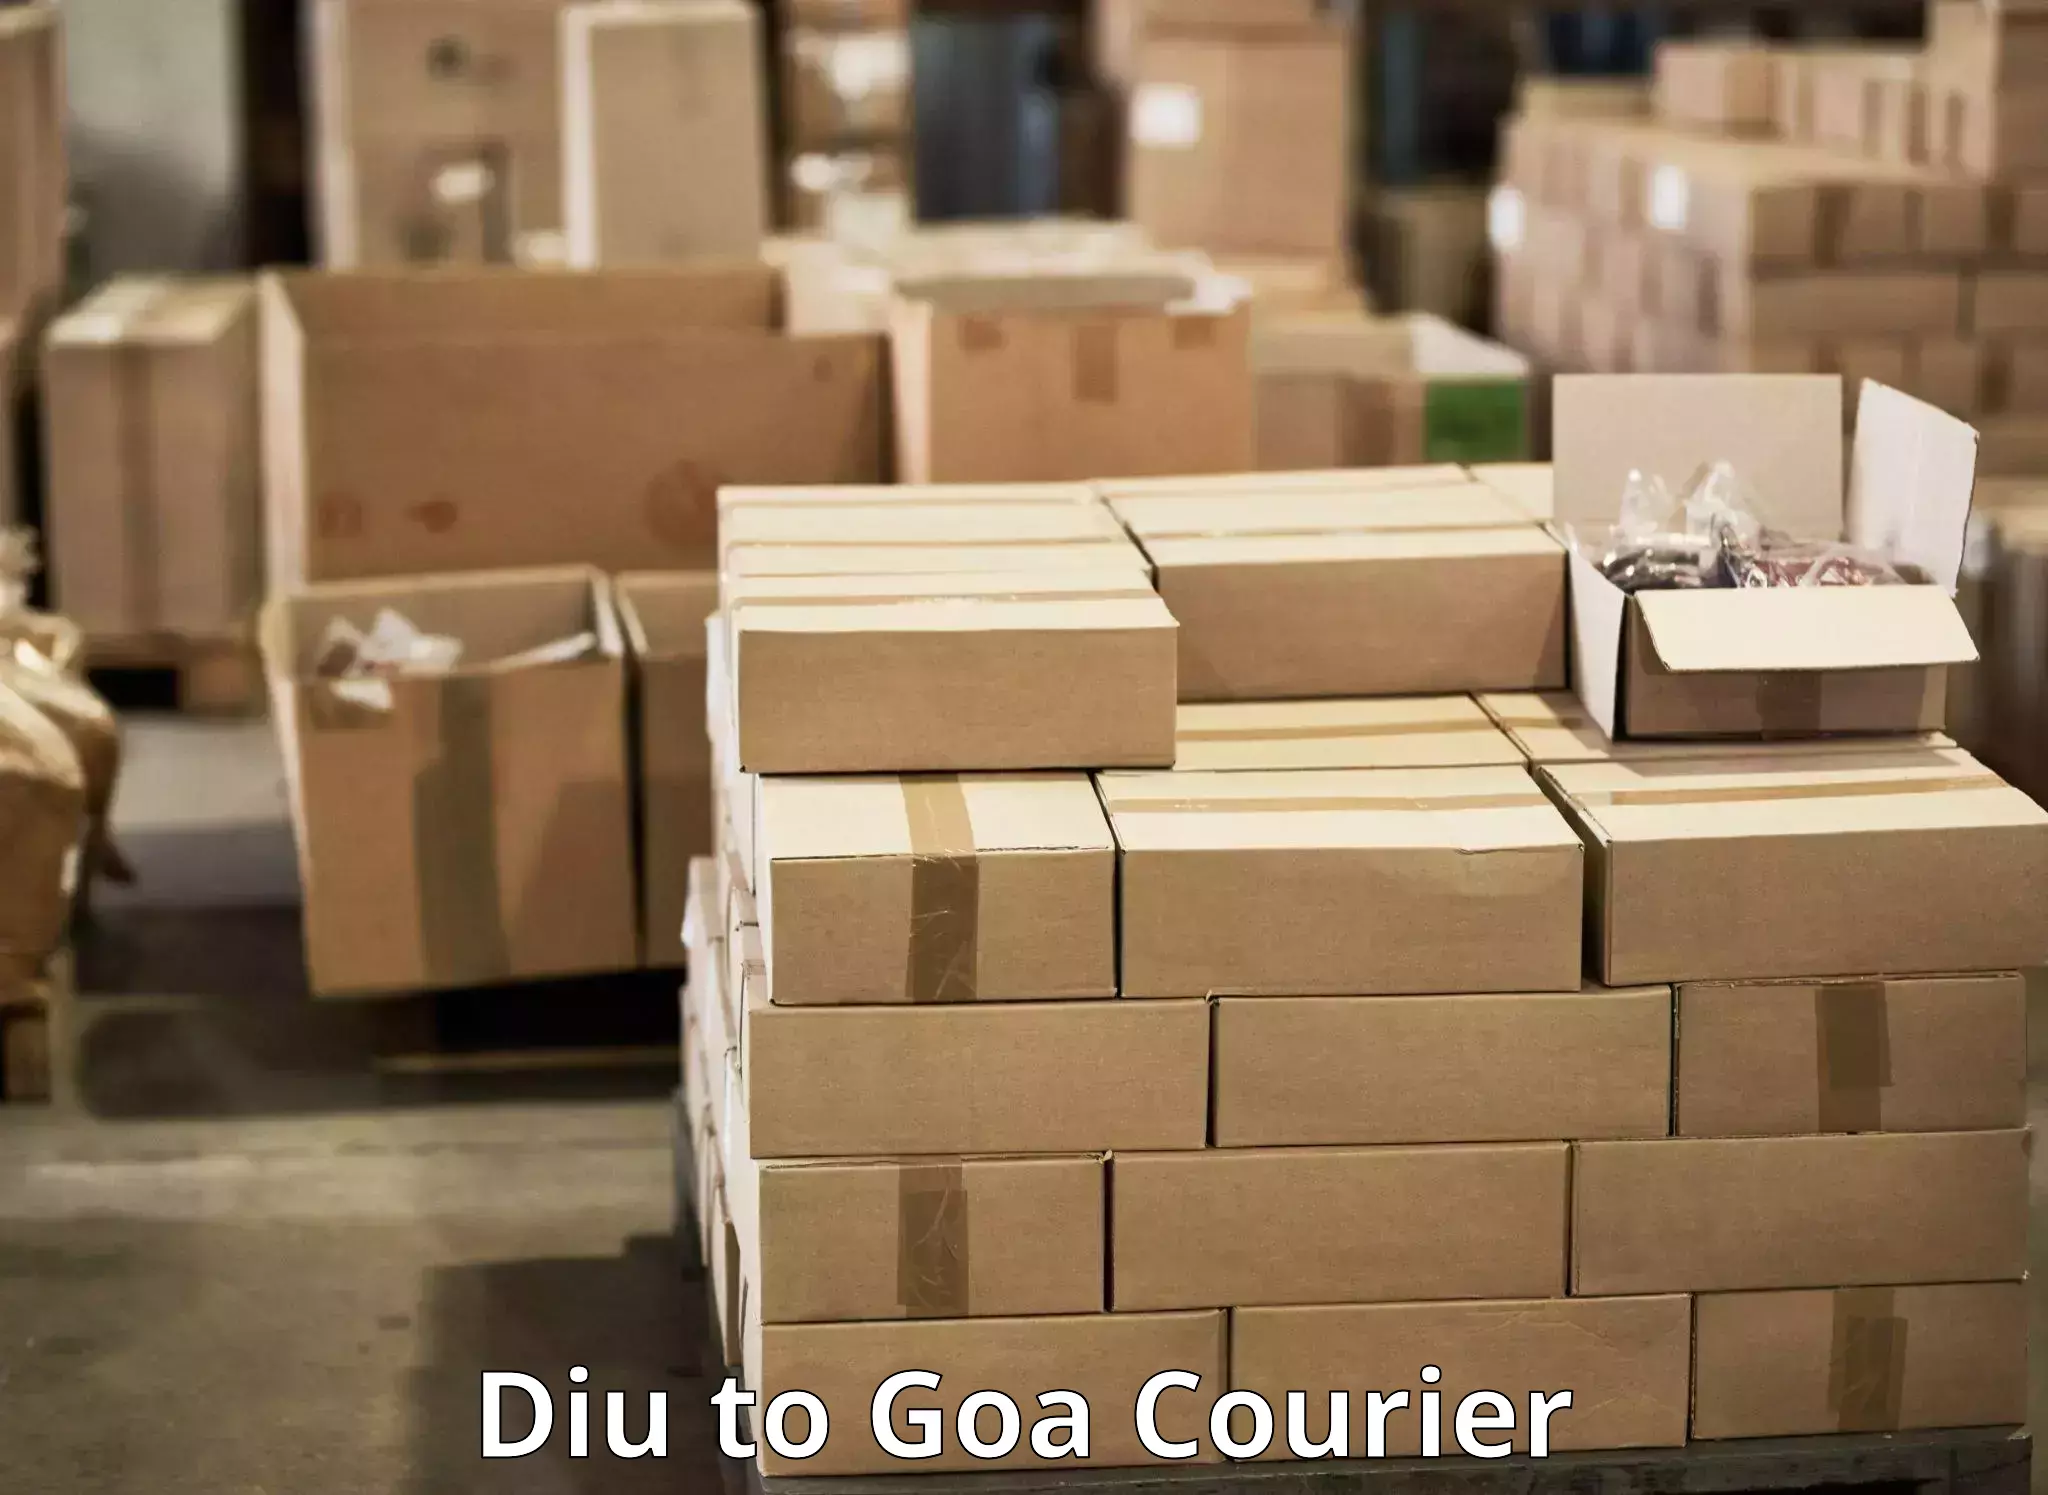 International courier networks Diu to Bardez